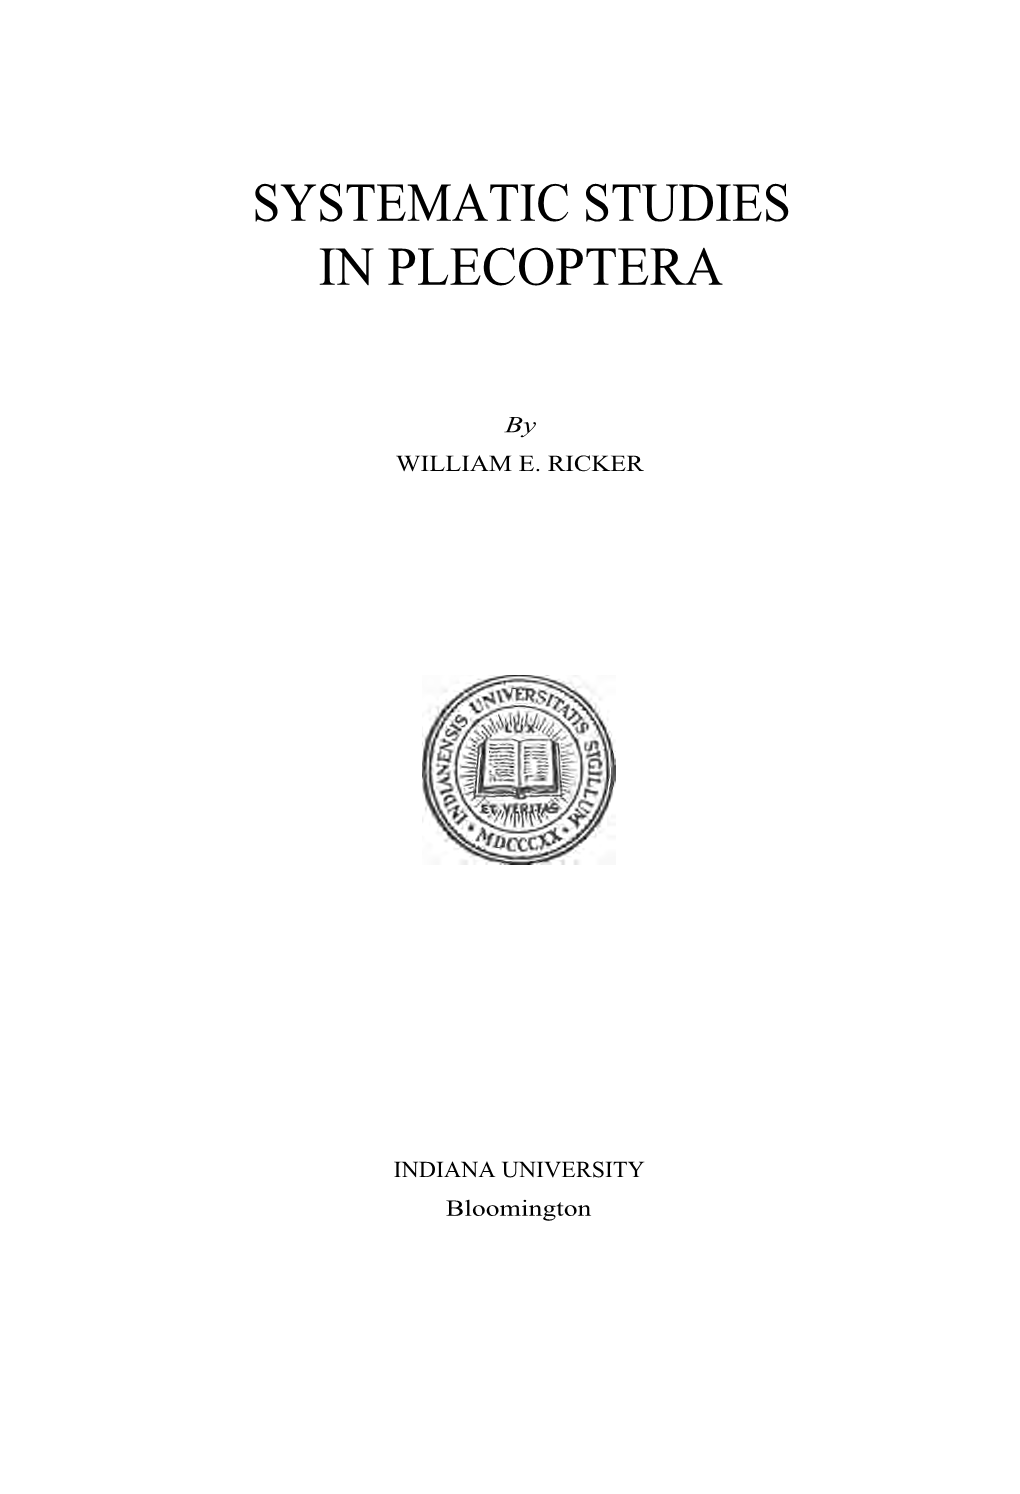 Systematic Studies in Plecoptera